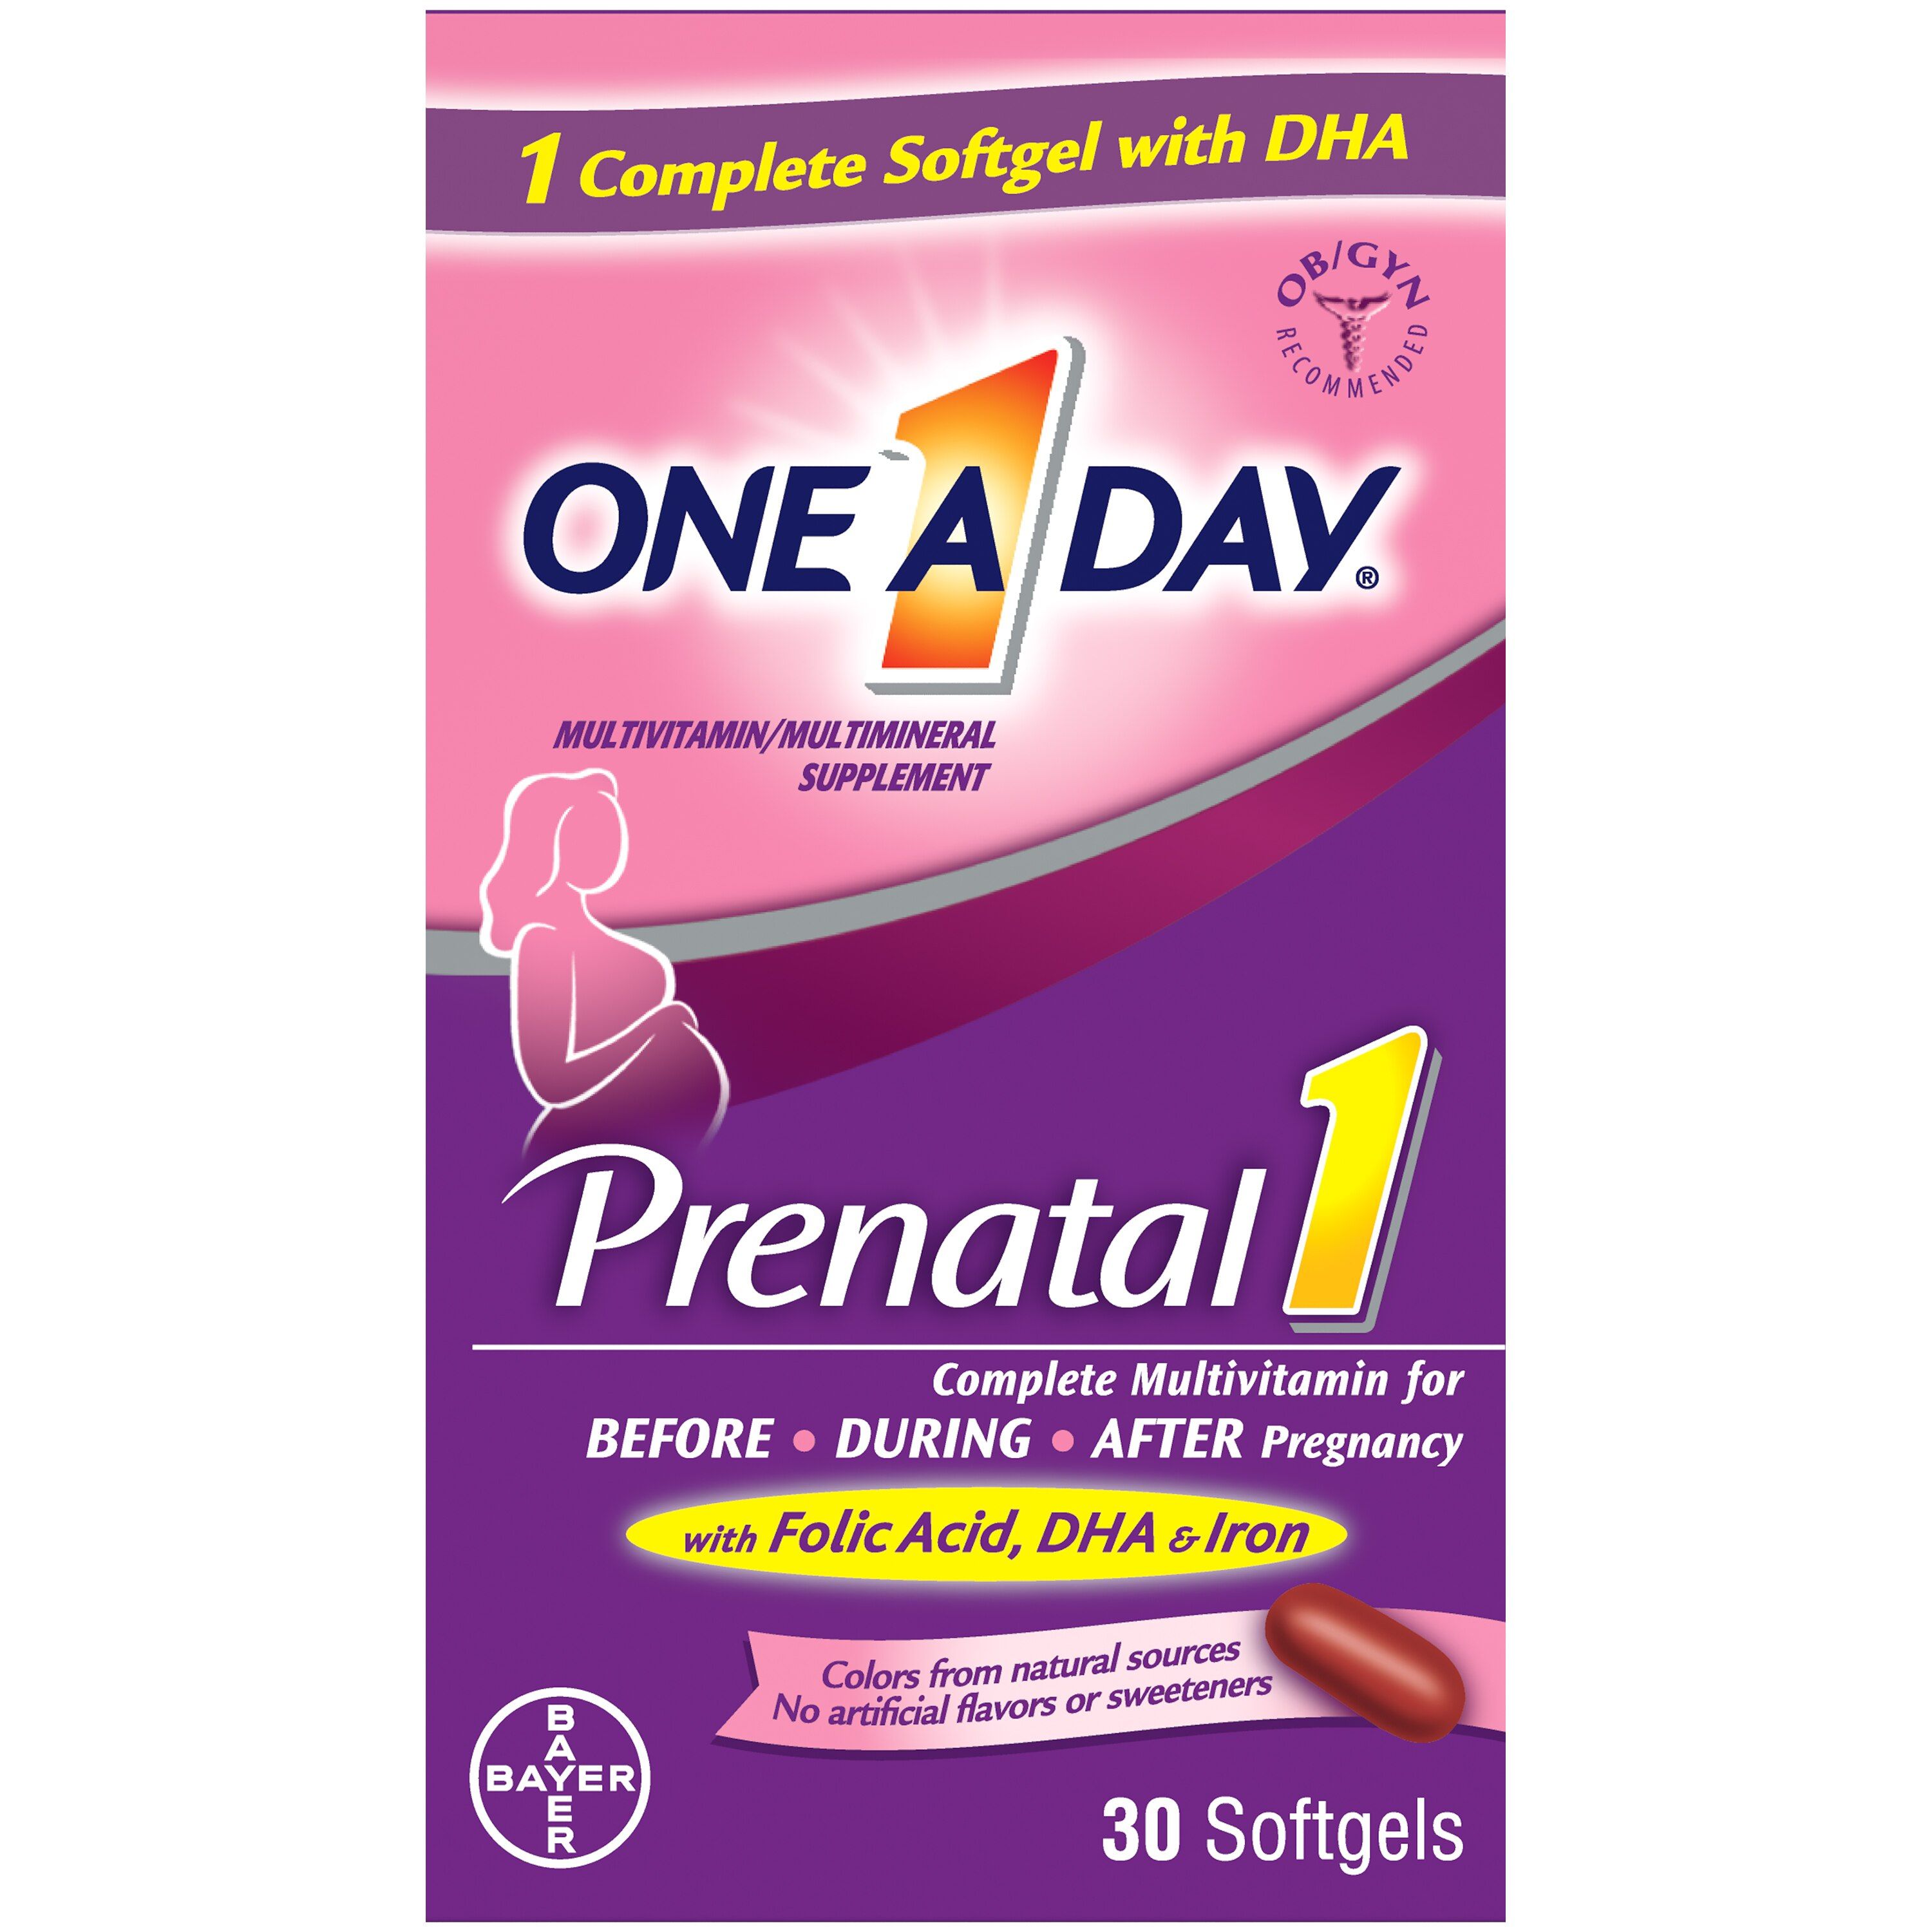 One A Day Women's Prenatal Multivitamin with Folic Acid, DHA & Iron Softgels - 30 ct